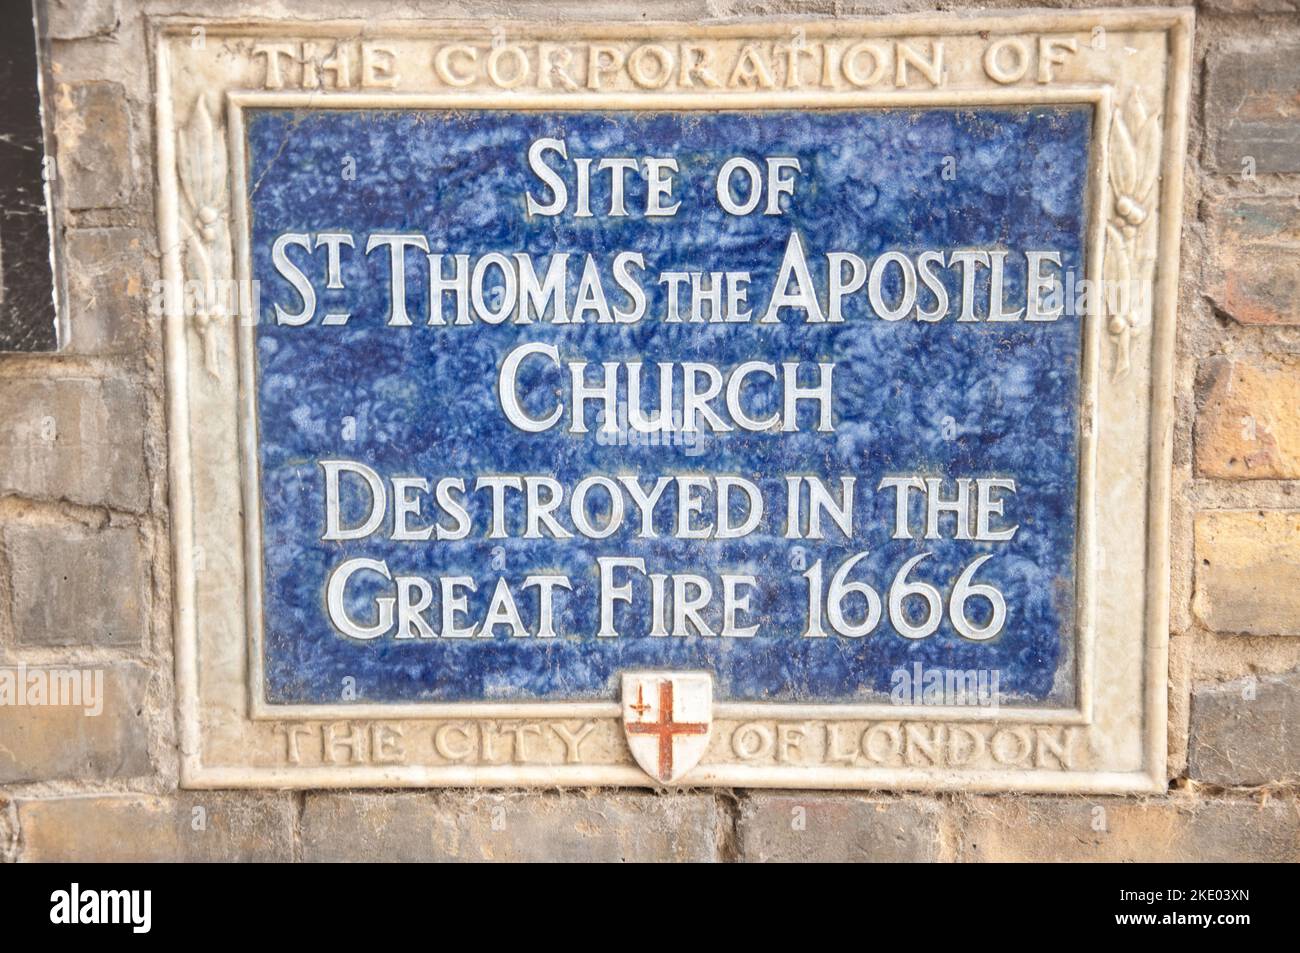 Plaque commemorating the Church of St Thomas the Apostle, destroyed in the Great Fire (1666),  City of London, London, UK Stock Photo